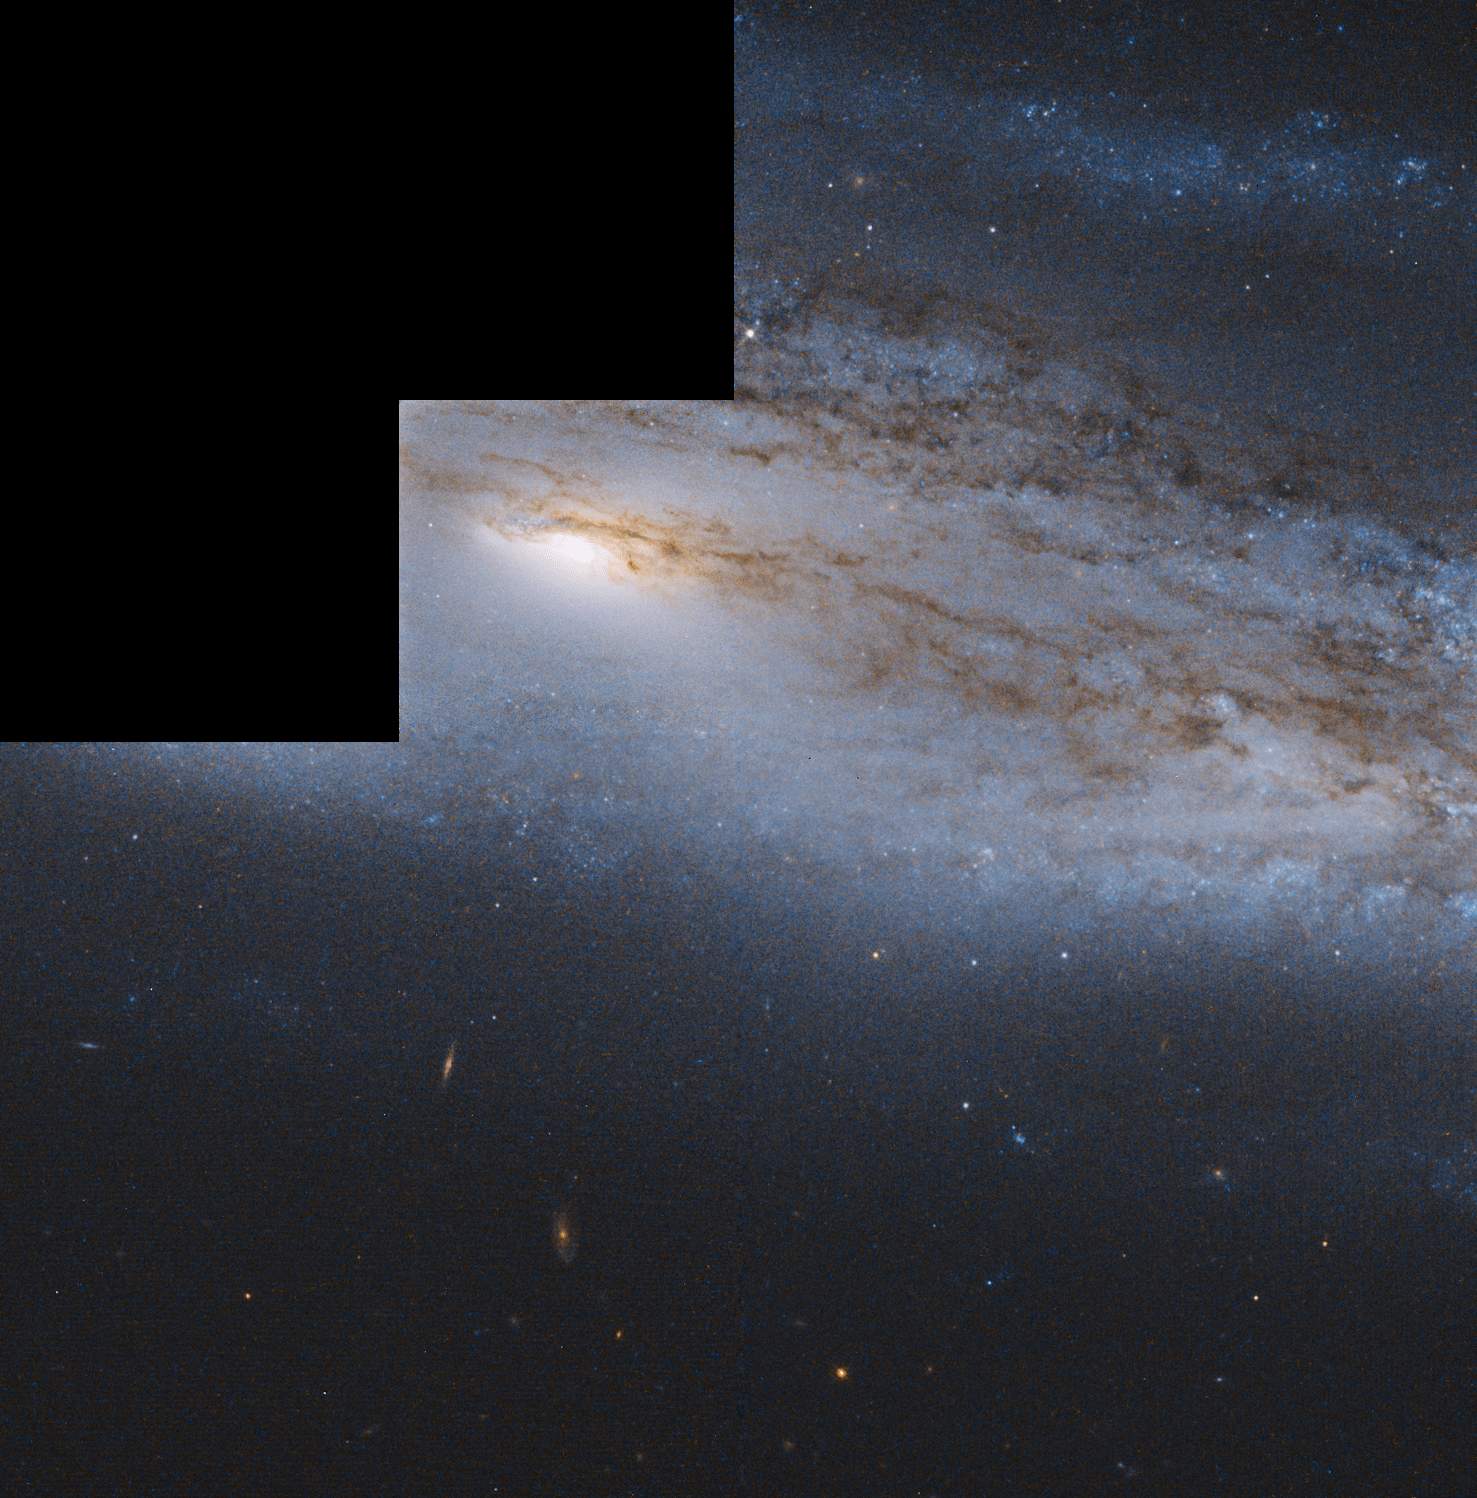 A bright yellow galaxy core shines, surrounded by spiral arms laced through with dark dust and bluish regions of star formation. A black stair step region near the upper left shows an area without Hubble data.